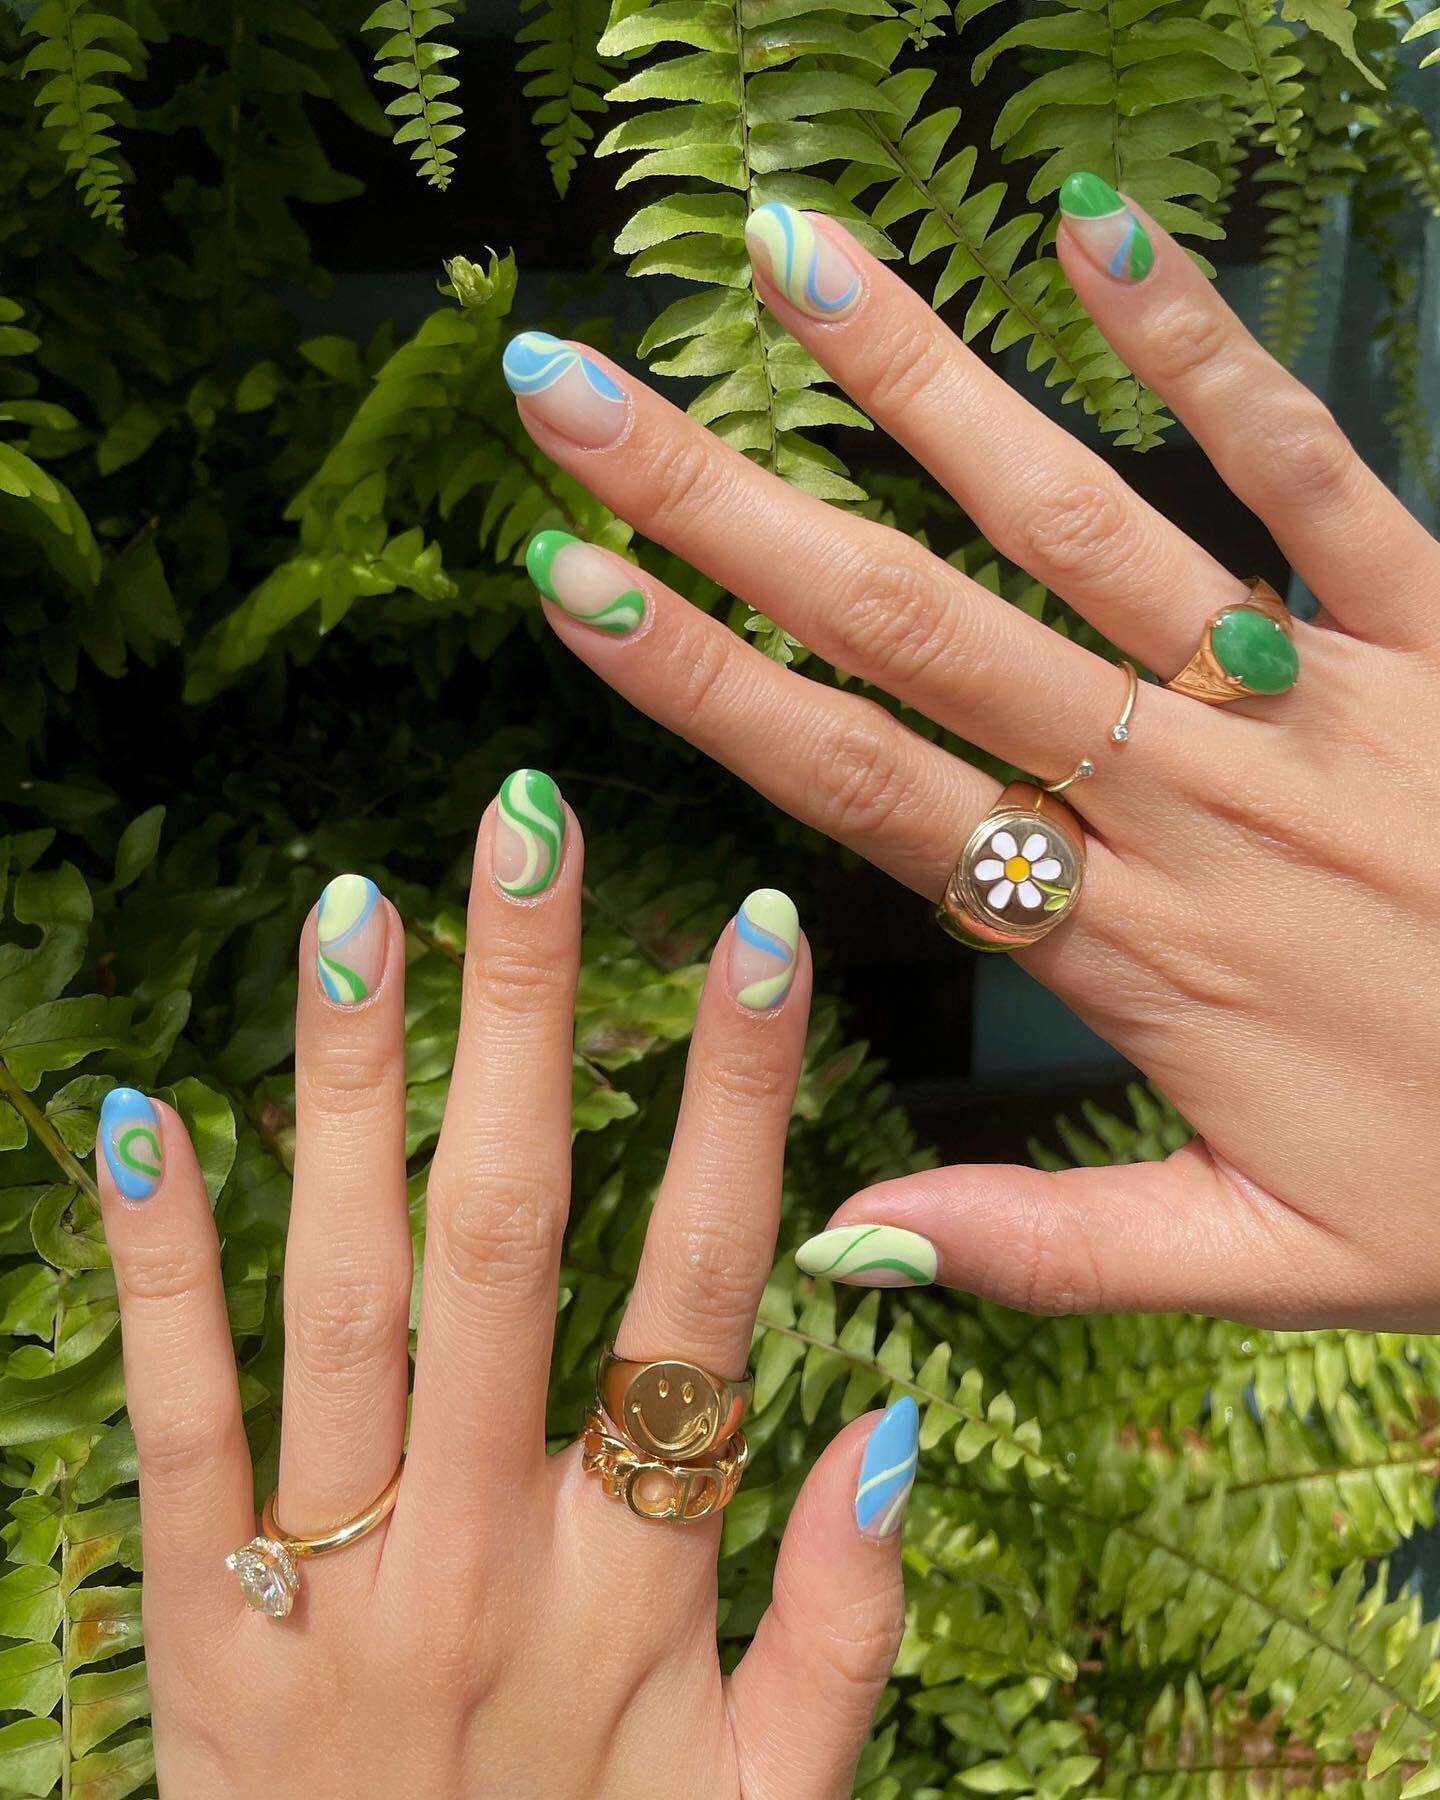 Toothpaste vibes for @samishome in a spearmint and peppermint palette 💚💙

Nail art by our Nail Artist Meiko 👩🏻&zwj;🎨

#FreshlyTinted

#greennails #simplenails #swirlnails #bluenails #summerdesign #spearmint #peppermint #mintnails #naildesigns #n